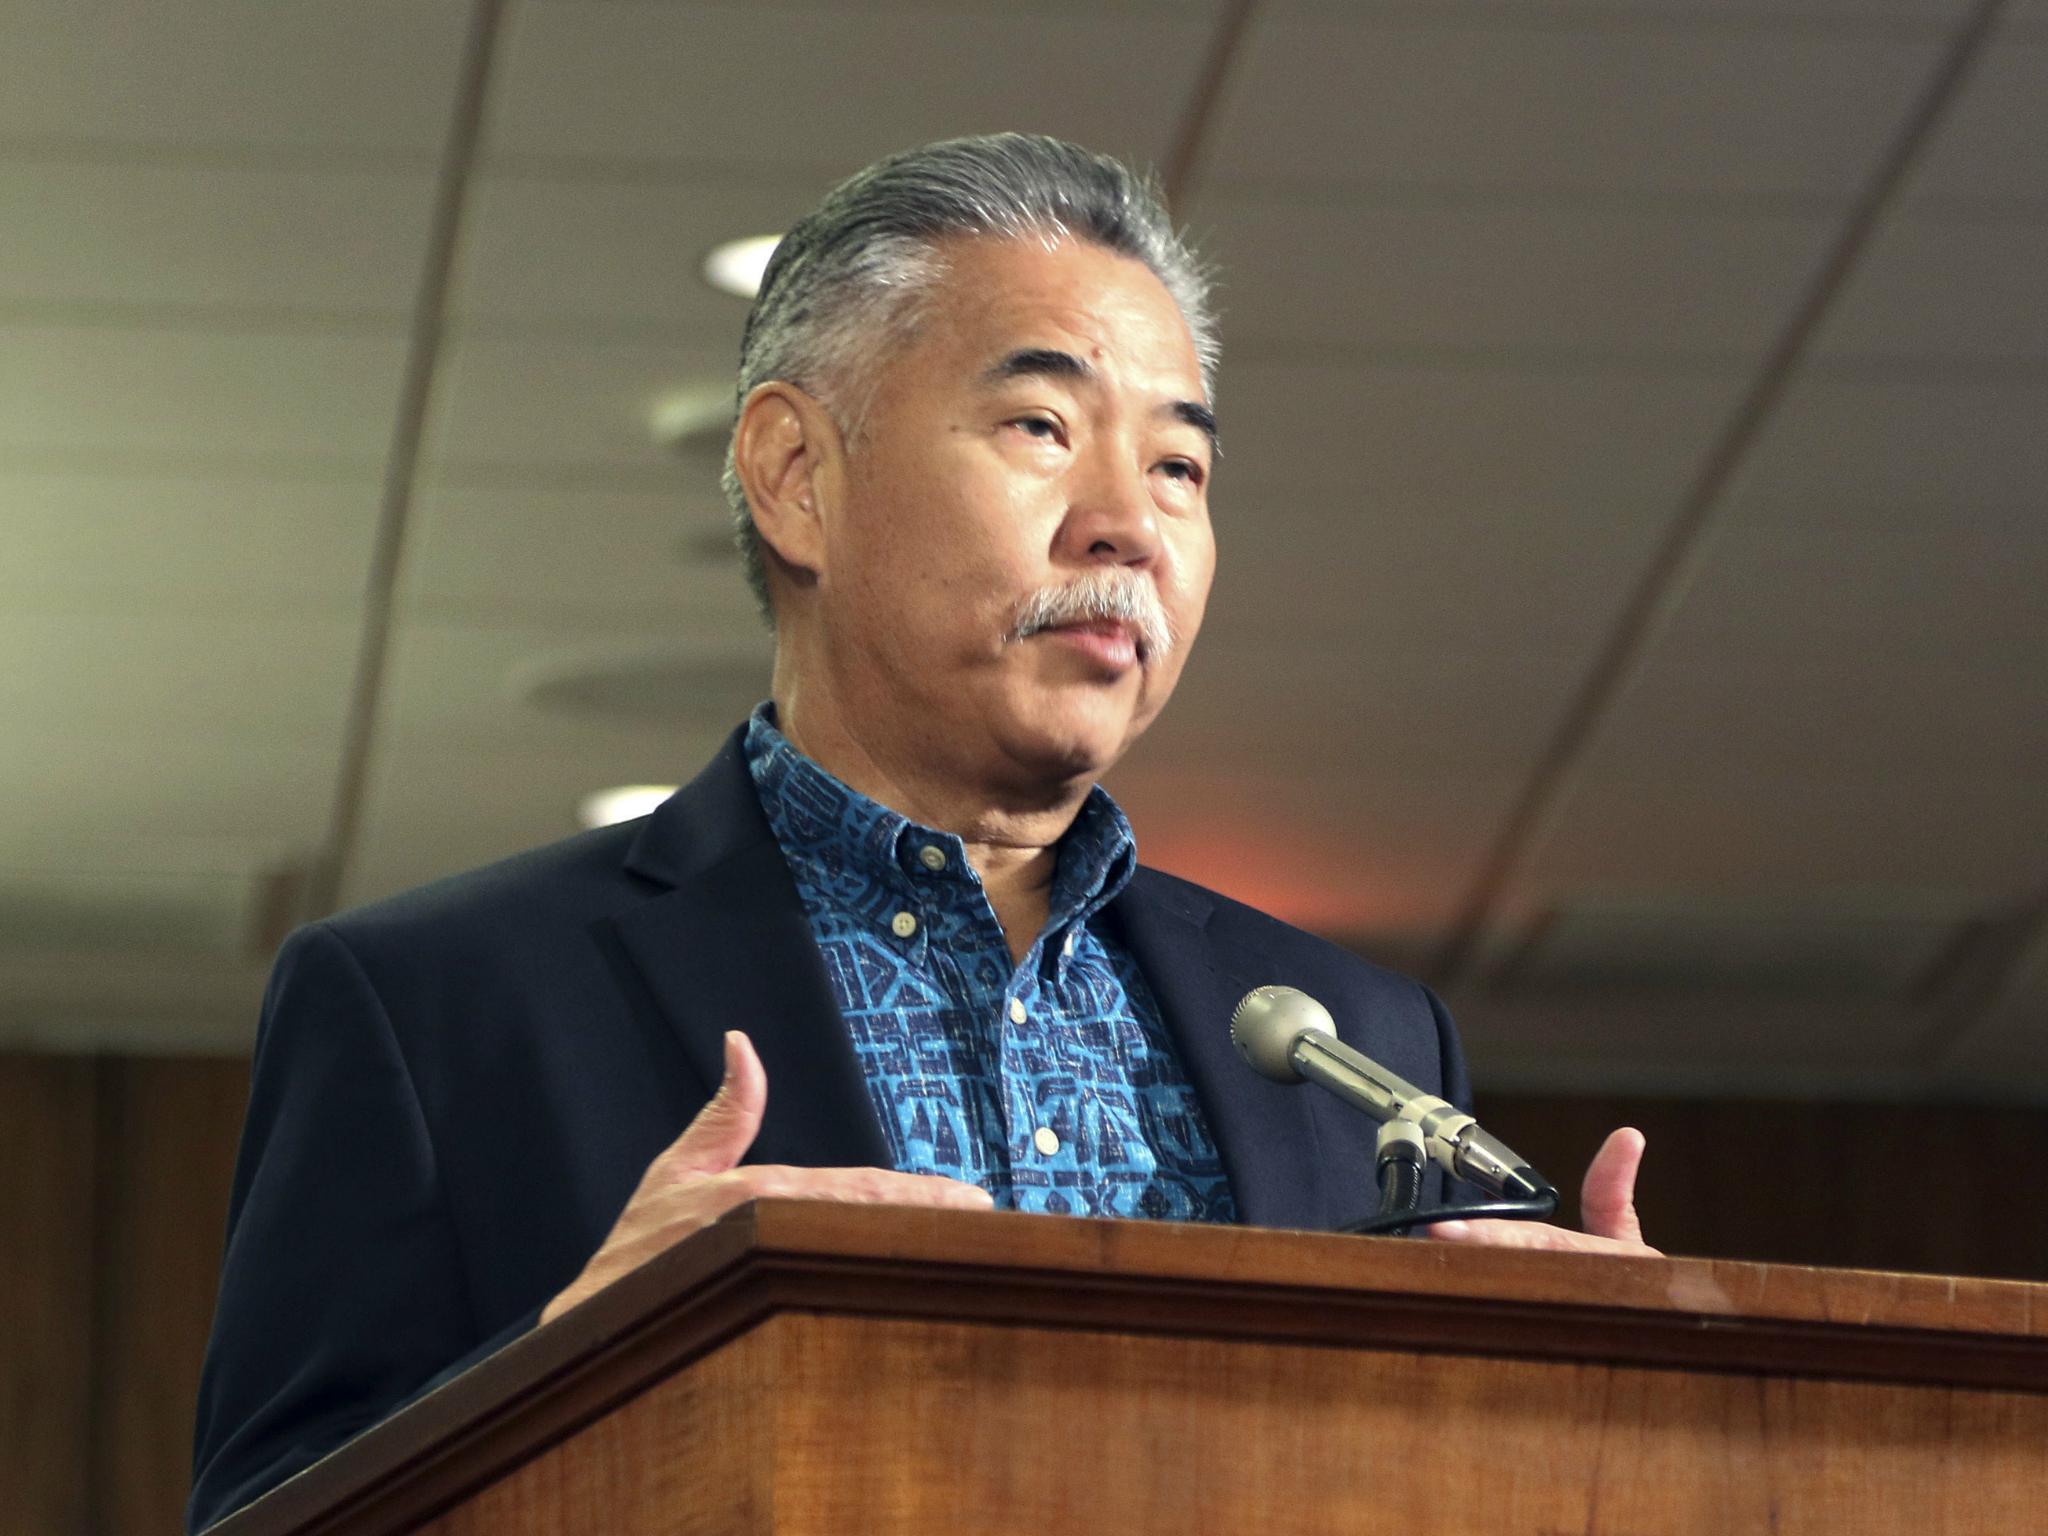 Hawaii Governor David Ige answers questions during a hearing in Honolulu, 19 January 2018.